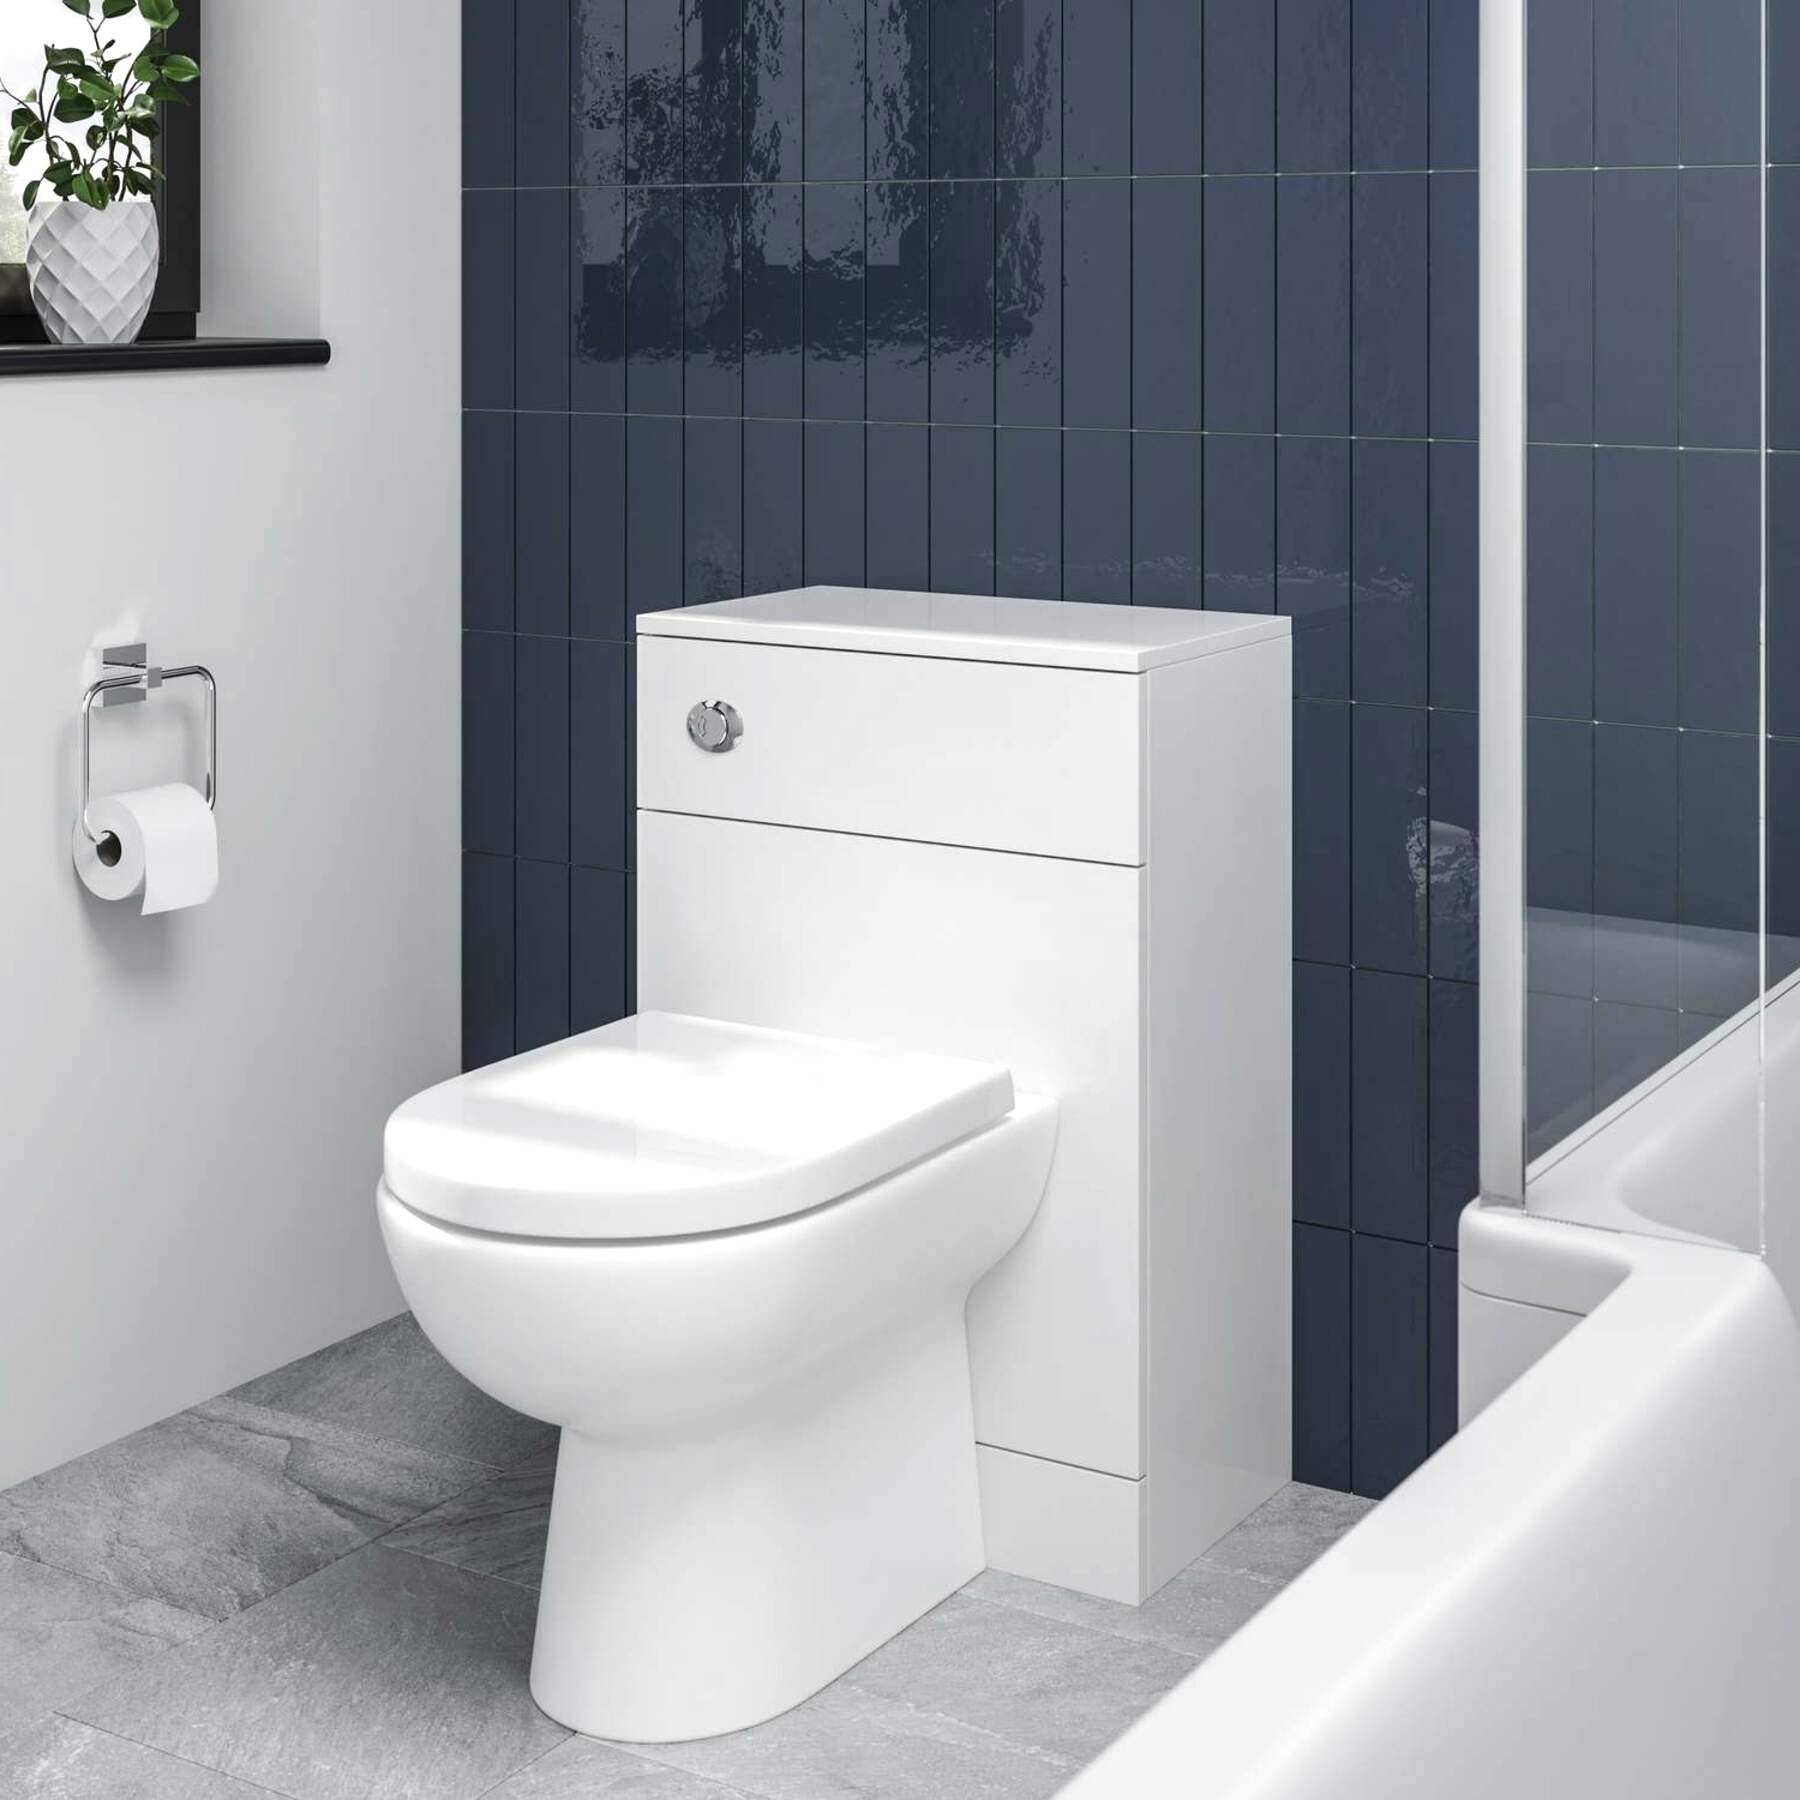 Concealed Toilet Unit for sale in UK | 46 used Concealed Toilet Units